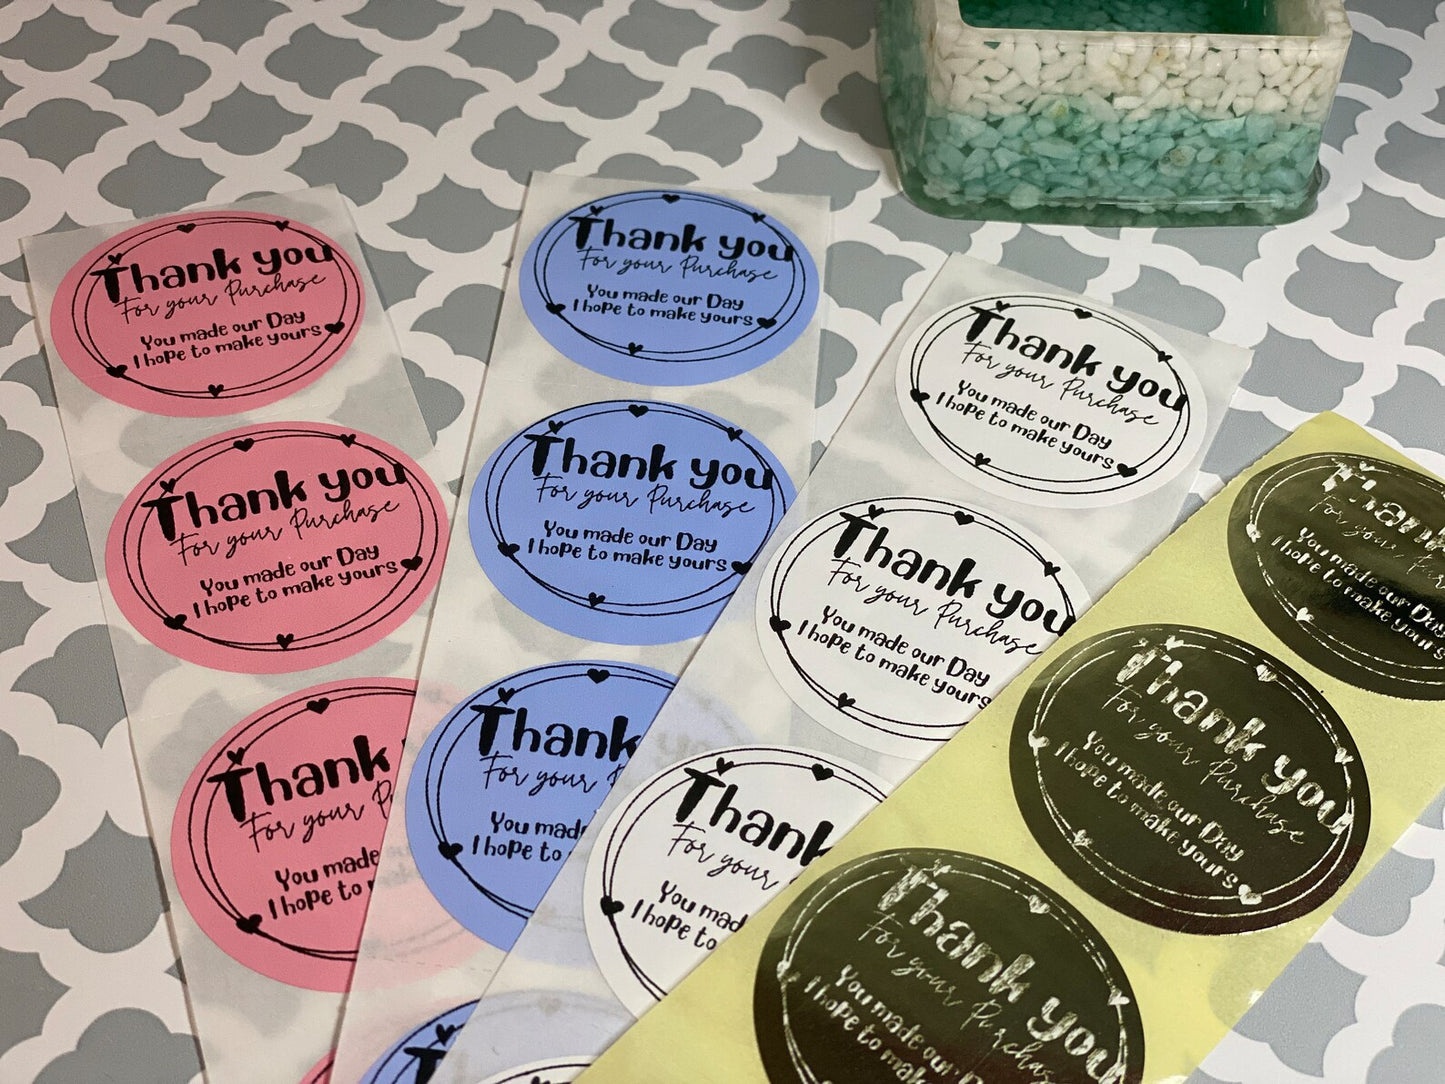 Thank You Thermal Printed Business Packaging Stickers